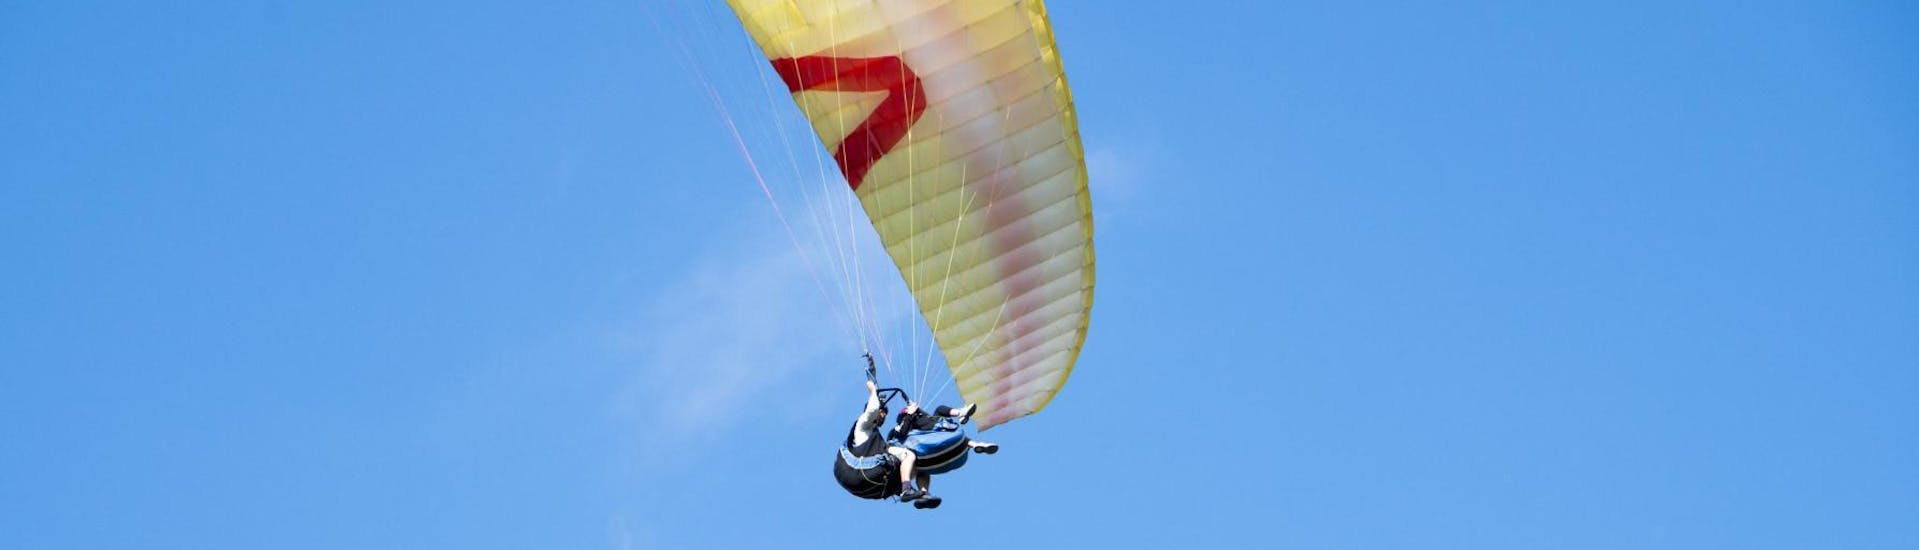 thermic-tandem-paragliding-in-the-sava-hills-sky-riders-paragliding-croatia-hero